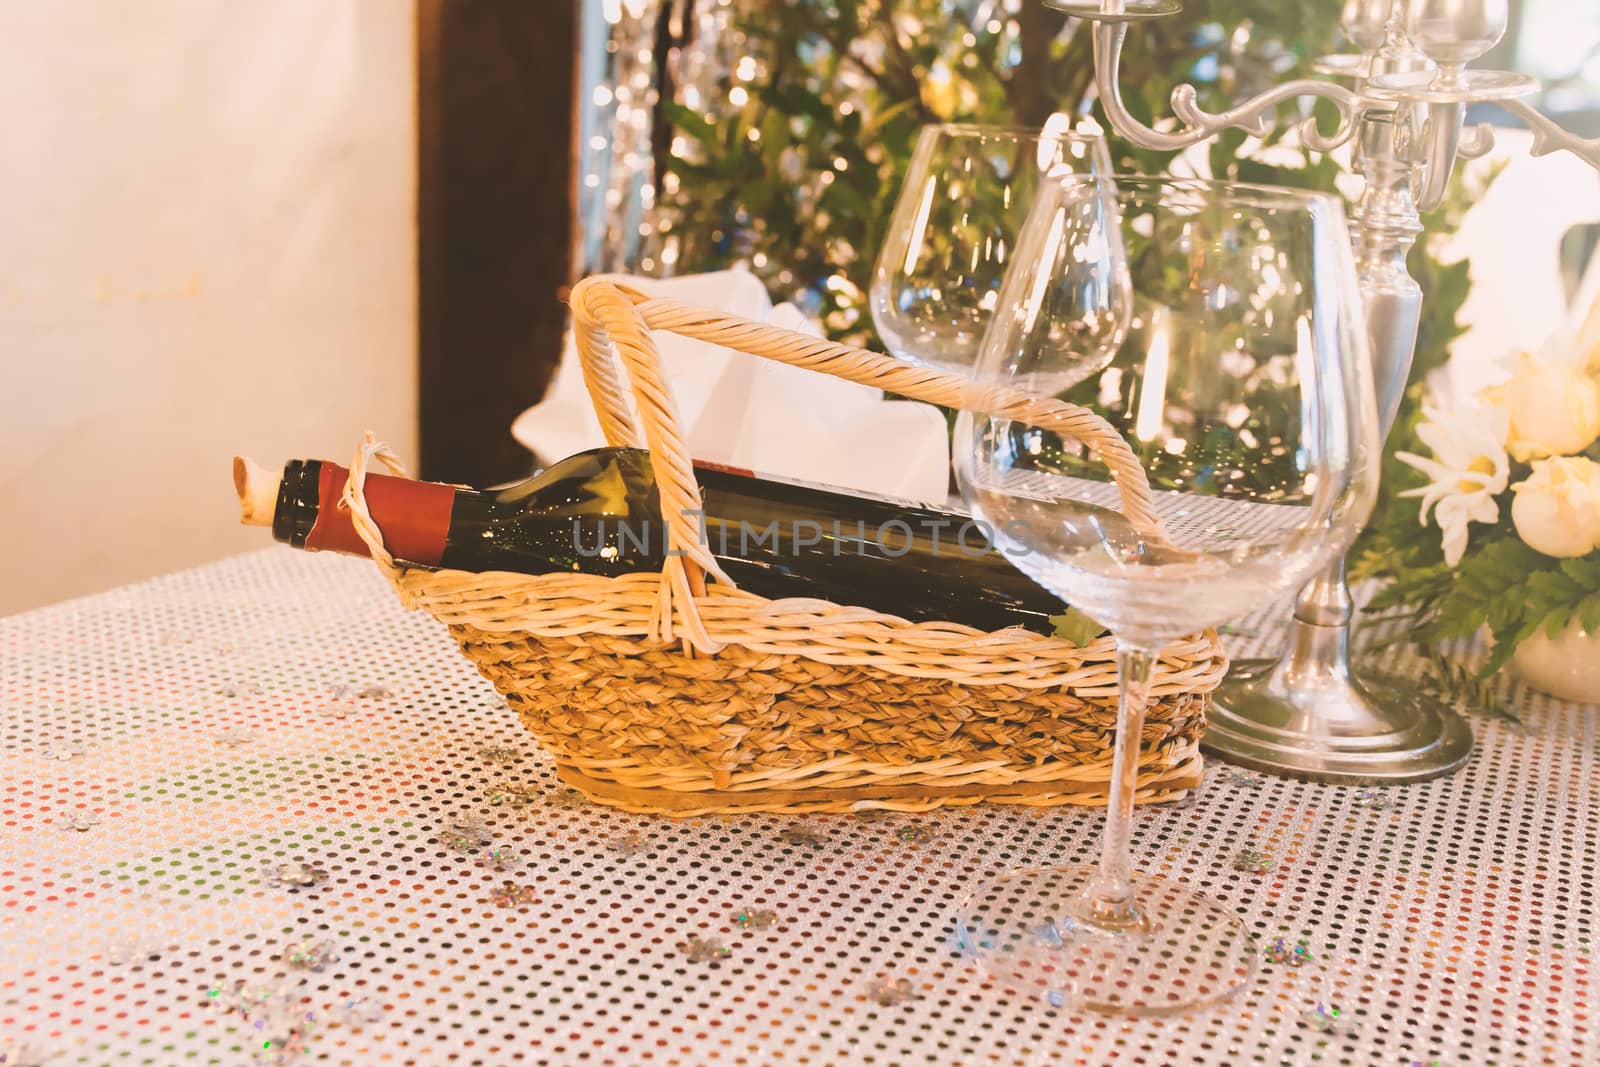 Bottle of wine on wood basket and Glasses on table.